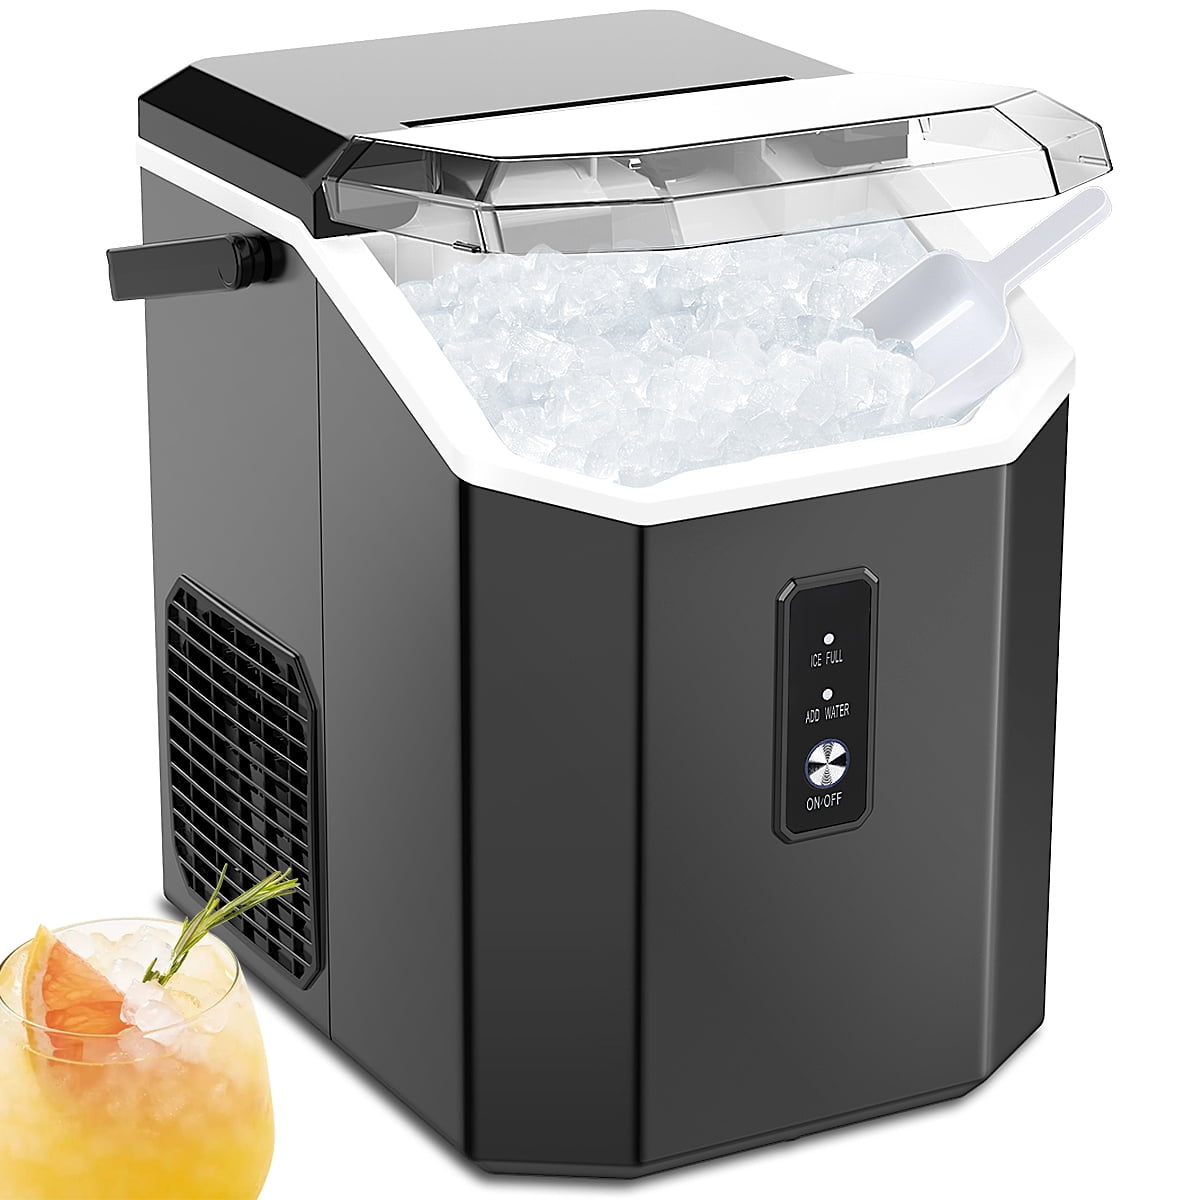  Kndko Nugget Ice Maker Countertop,33lbs/Day, Pellet ice Maker,a  Basket in 1.5 Hour, Self-Cleaning, One-Click Design, Compact Crushed Ice  Maker with Chewy Ice for Home Bar Party : Appliances